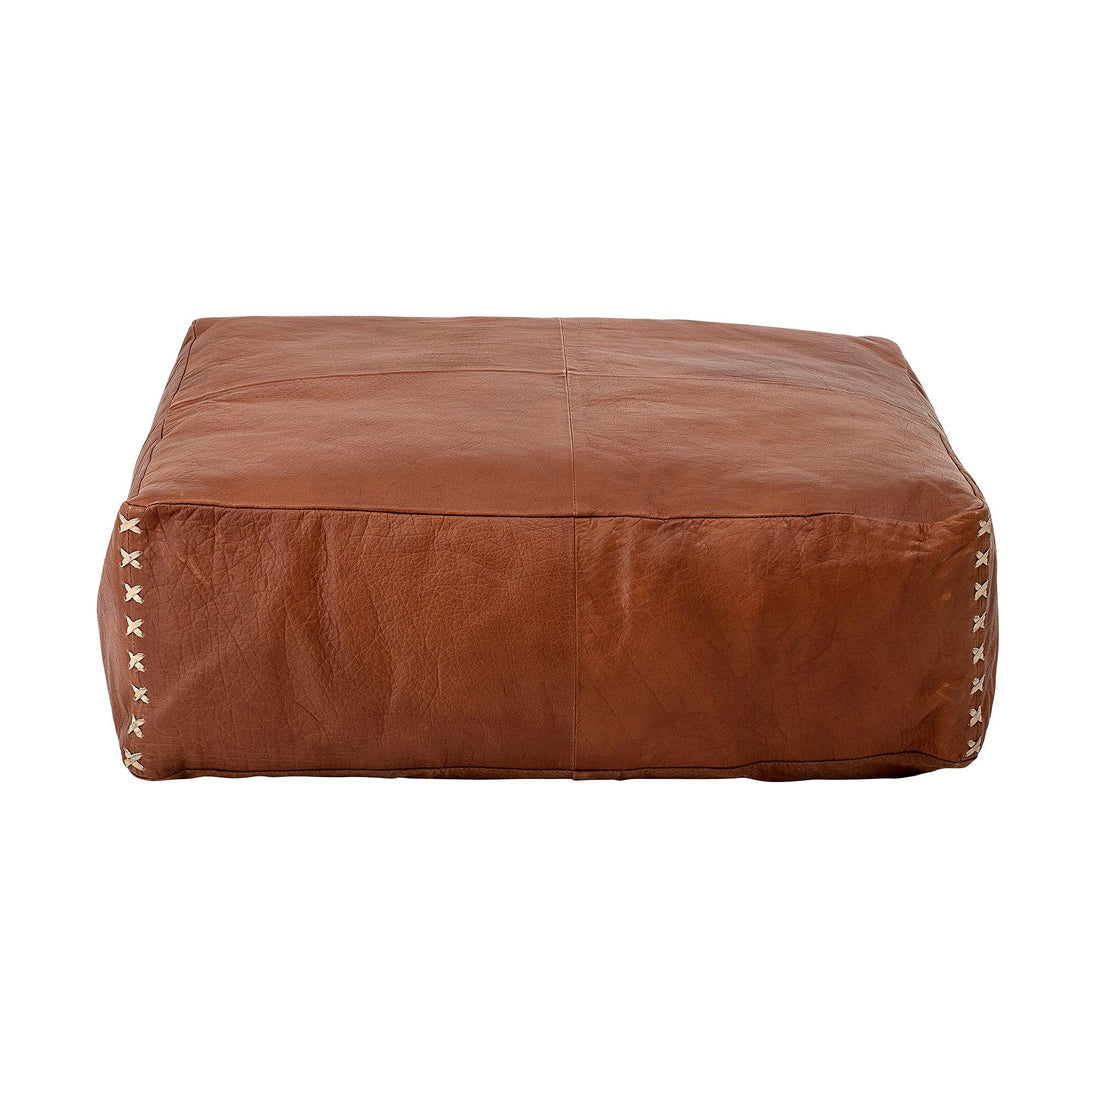 Bloomingville - Pouf, Brown, Leather 60×60 cm